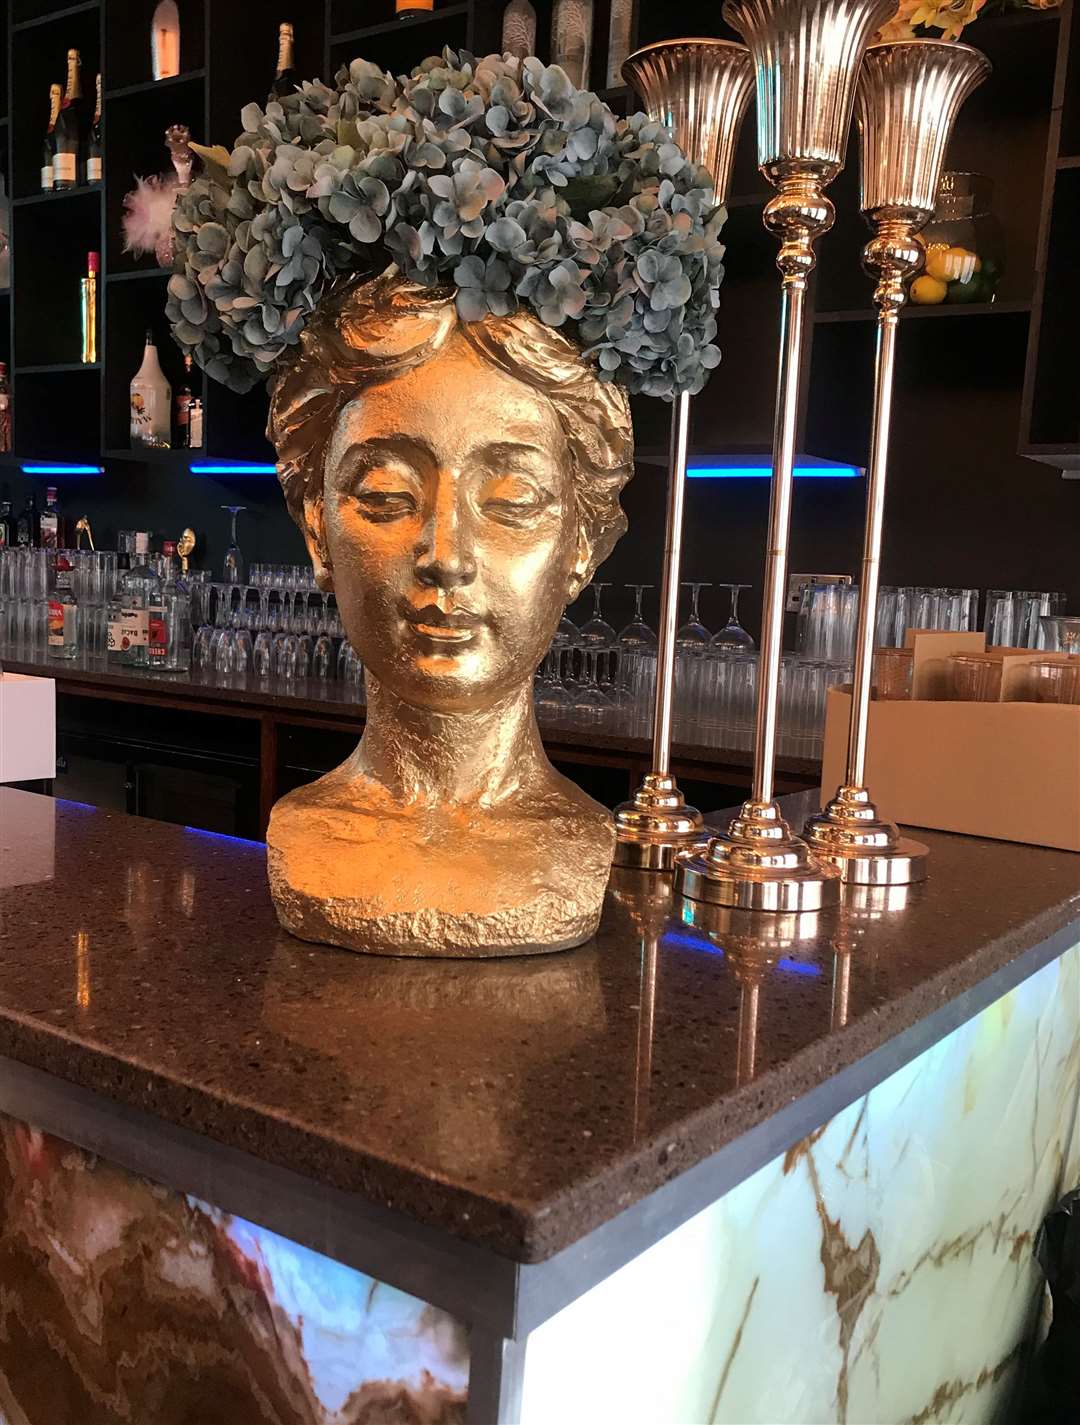 Meet Mavericka - who takes pride of place on the bar